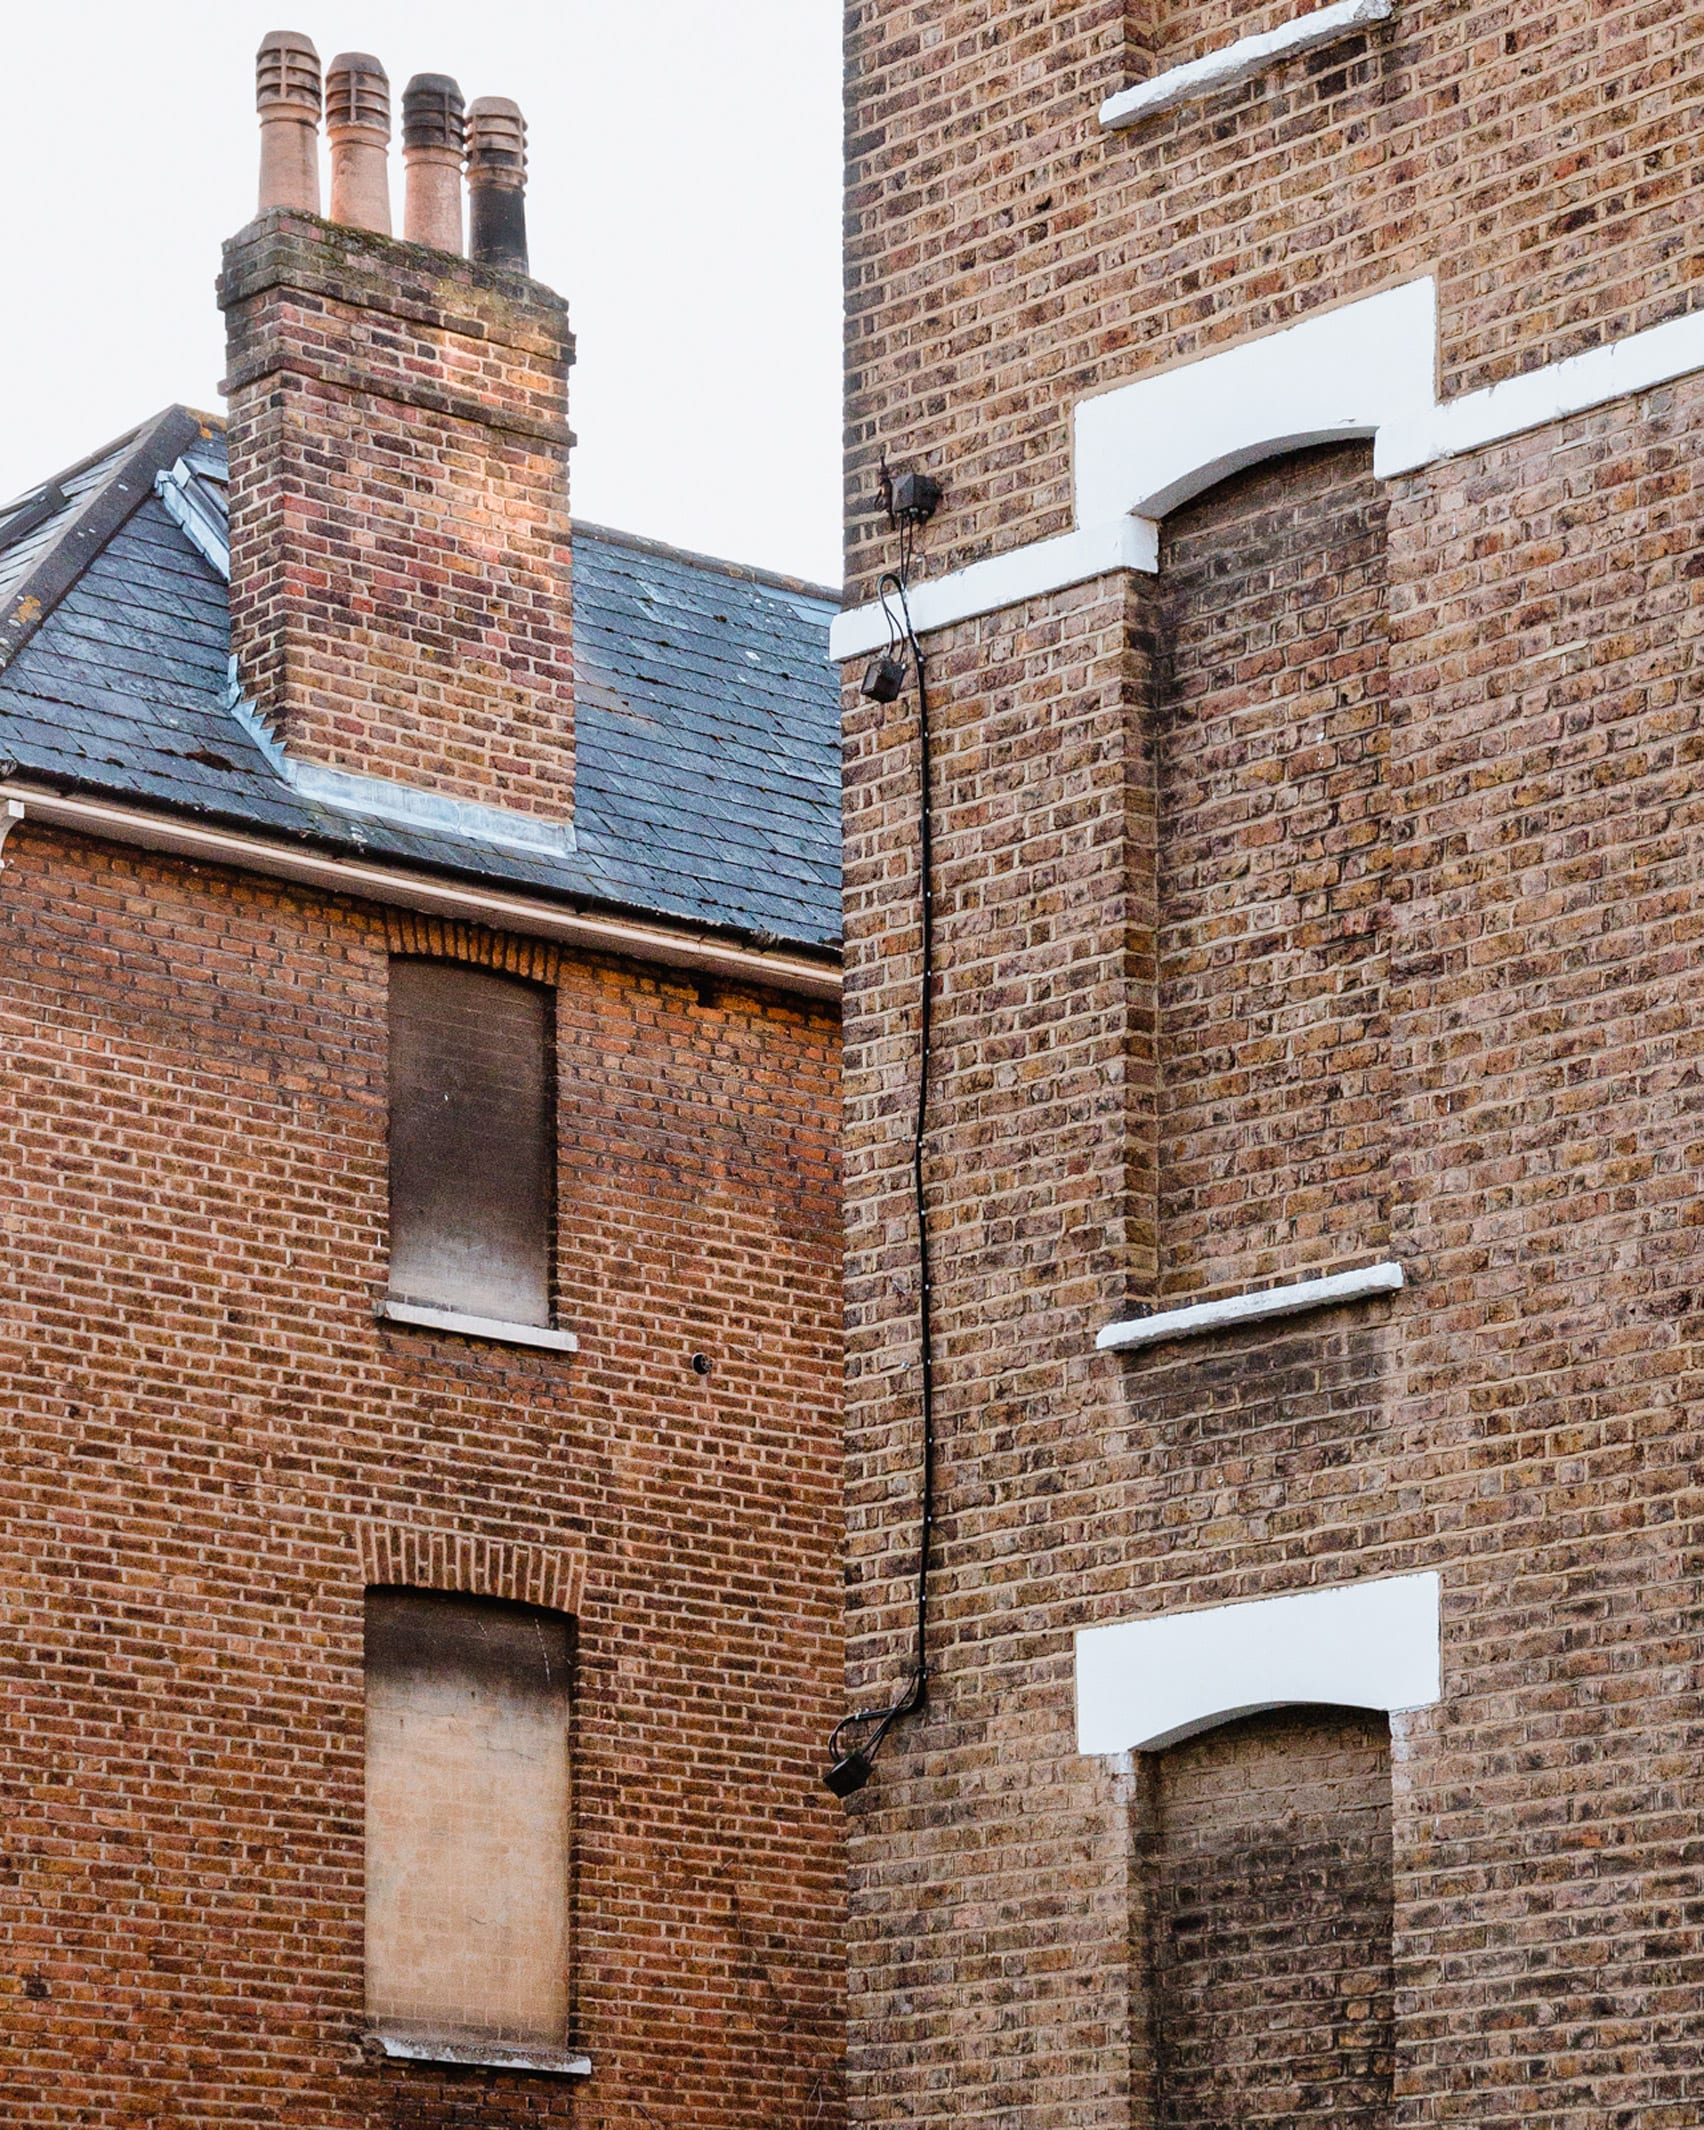 Brick houses in London with covered windows